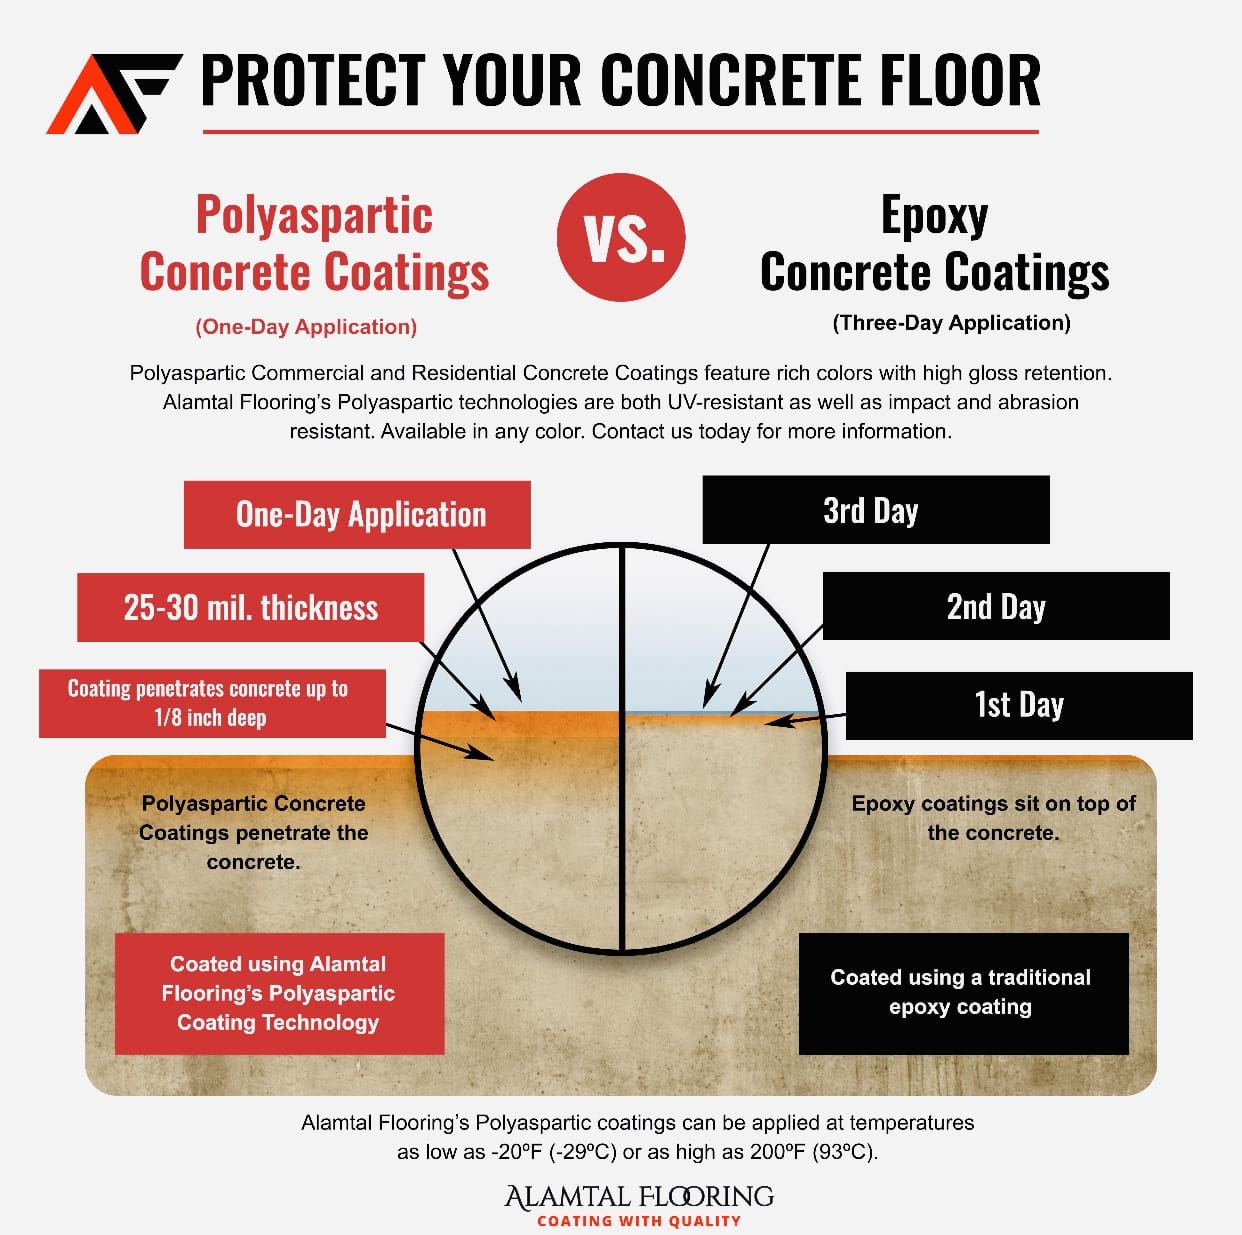 Protect Your Concrete Floor with Polyaspartic or Epoxy Concrete Coatings - Coating Diagram